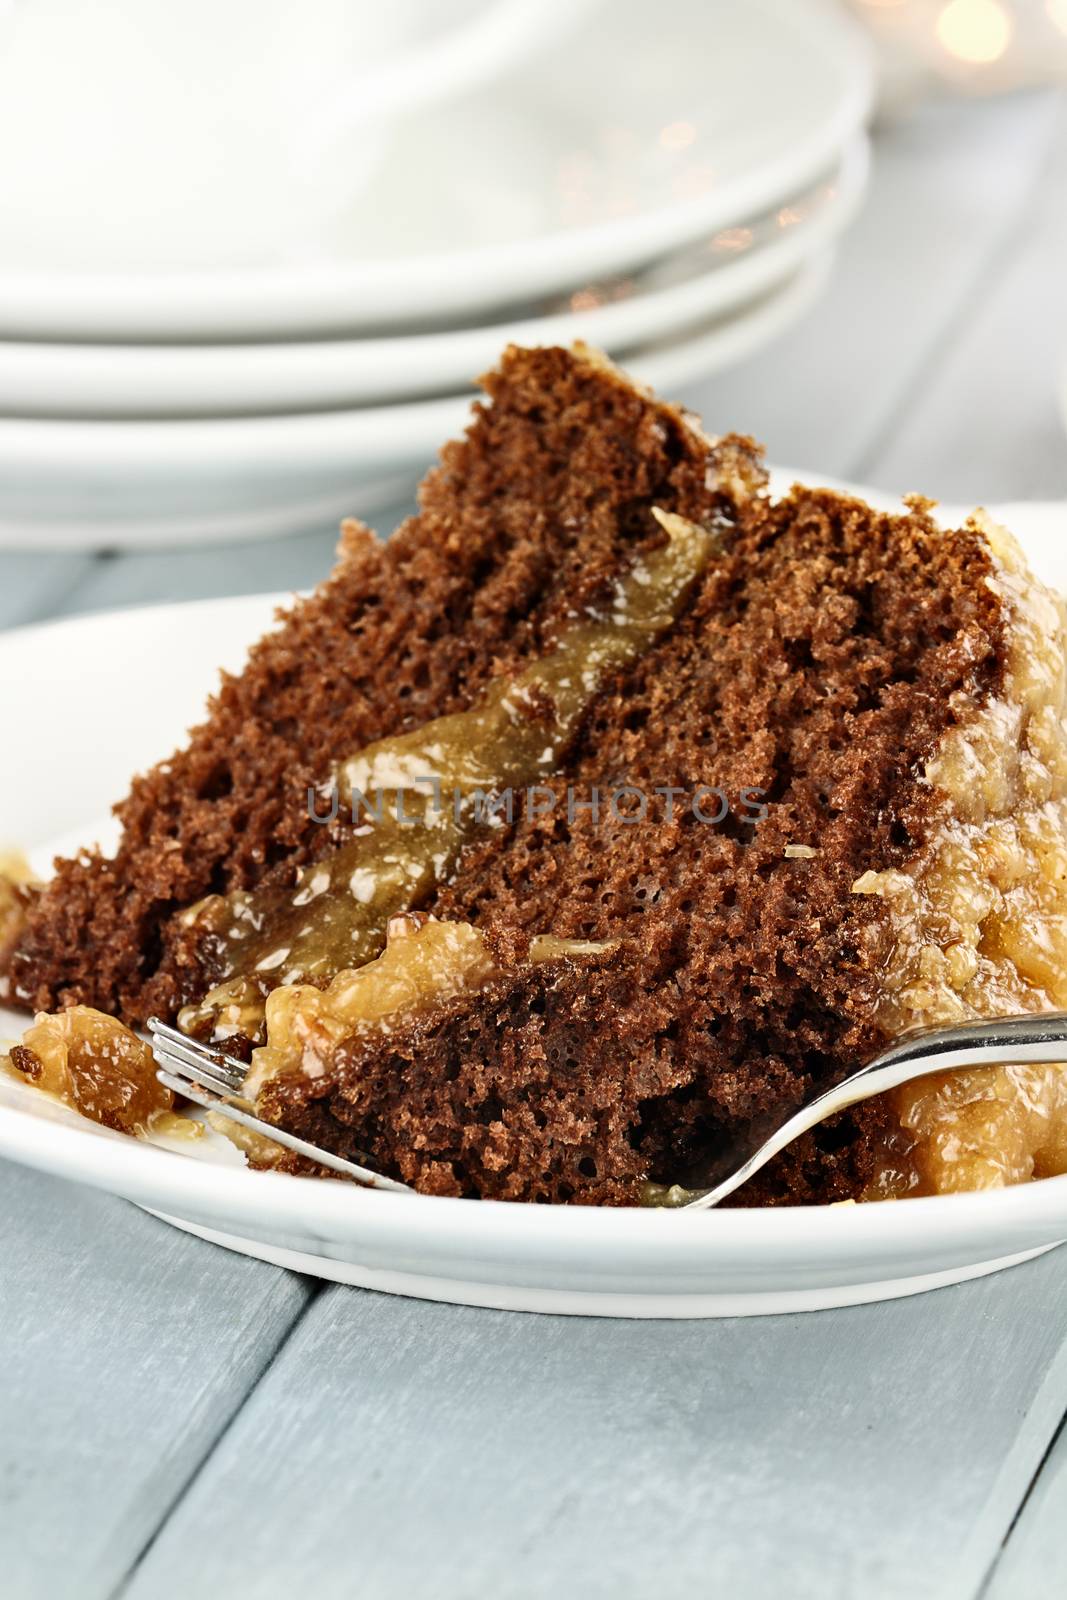 A slice of German chocolate cake on a plate. Shallow depth of field with selective focus on bite on the fork.